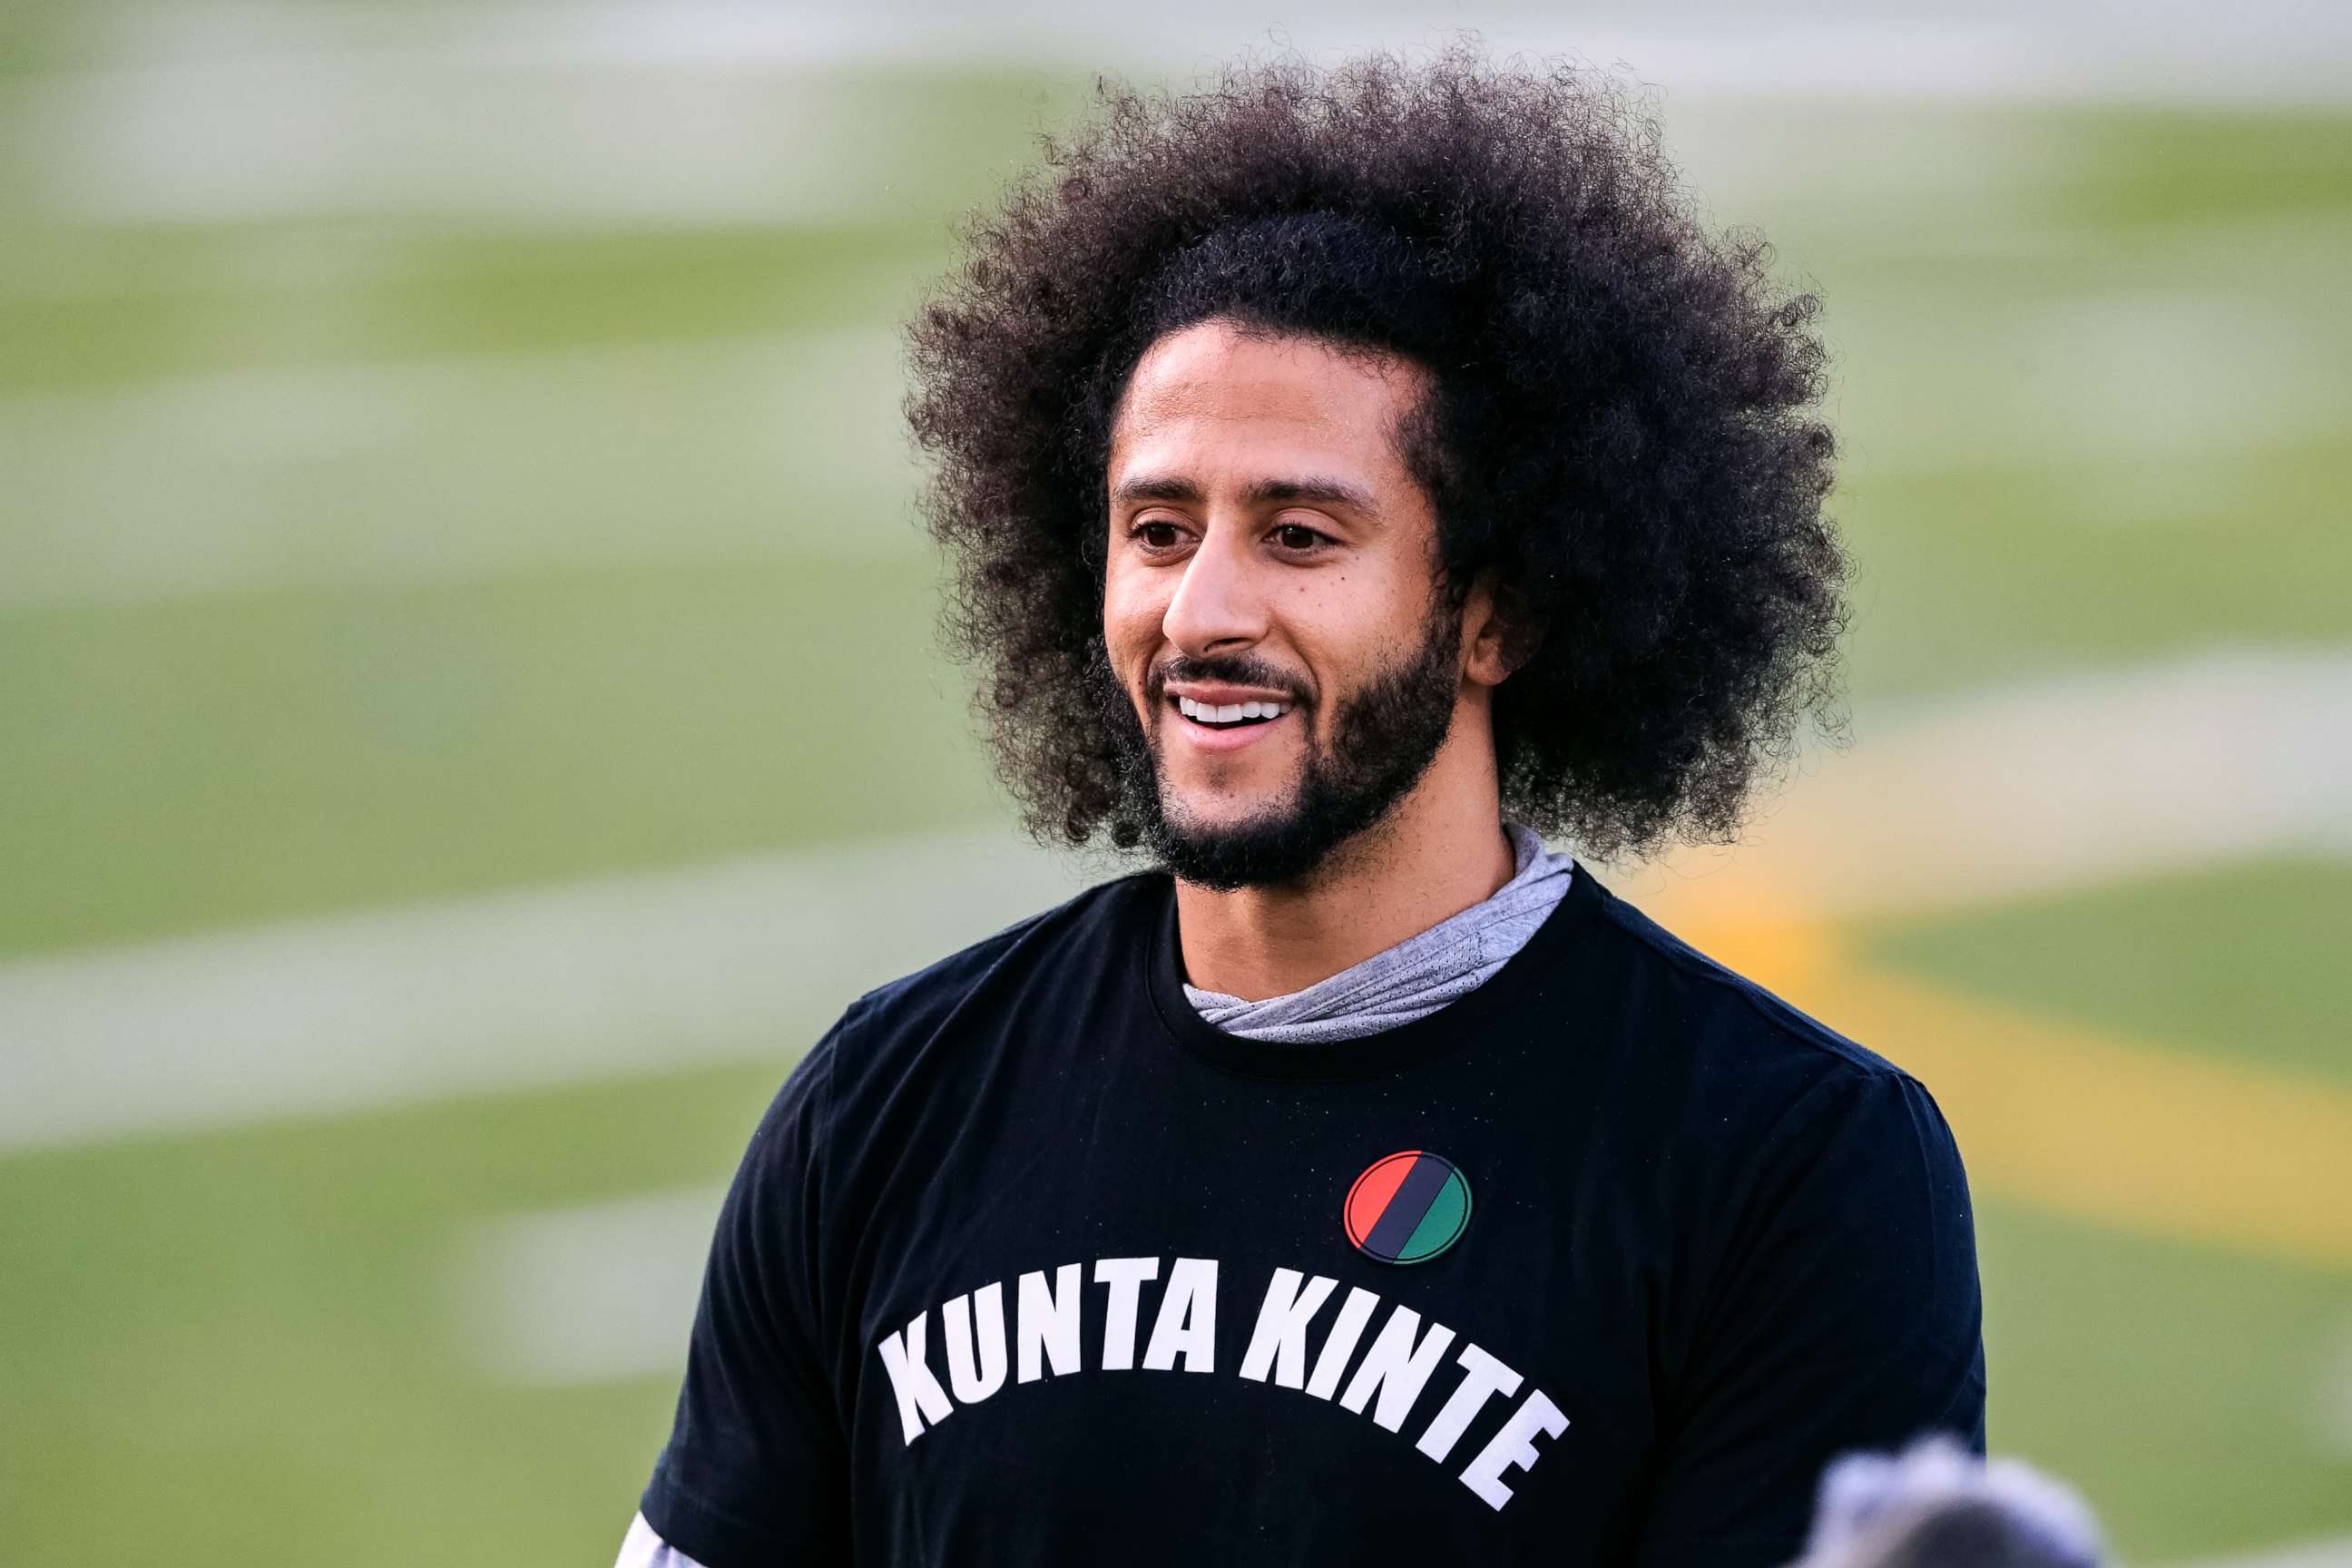 Colin Kaepernick joins Mediums board of directors, will write about race and civil rights issues